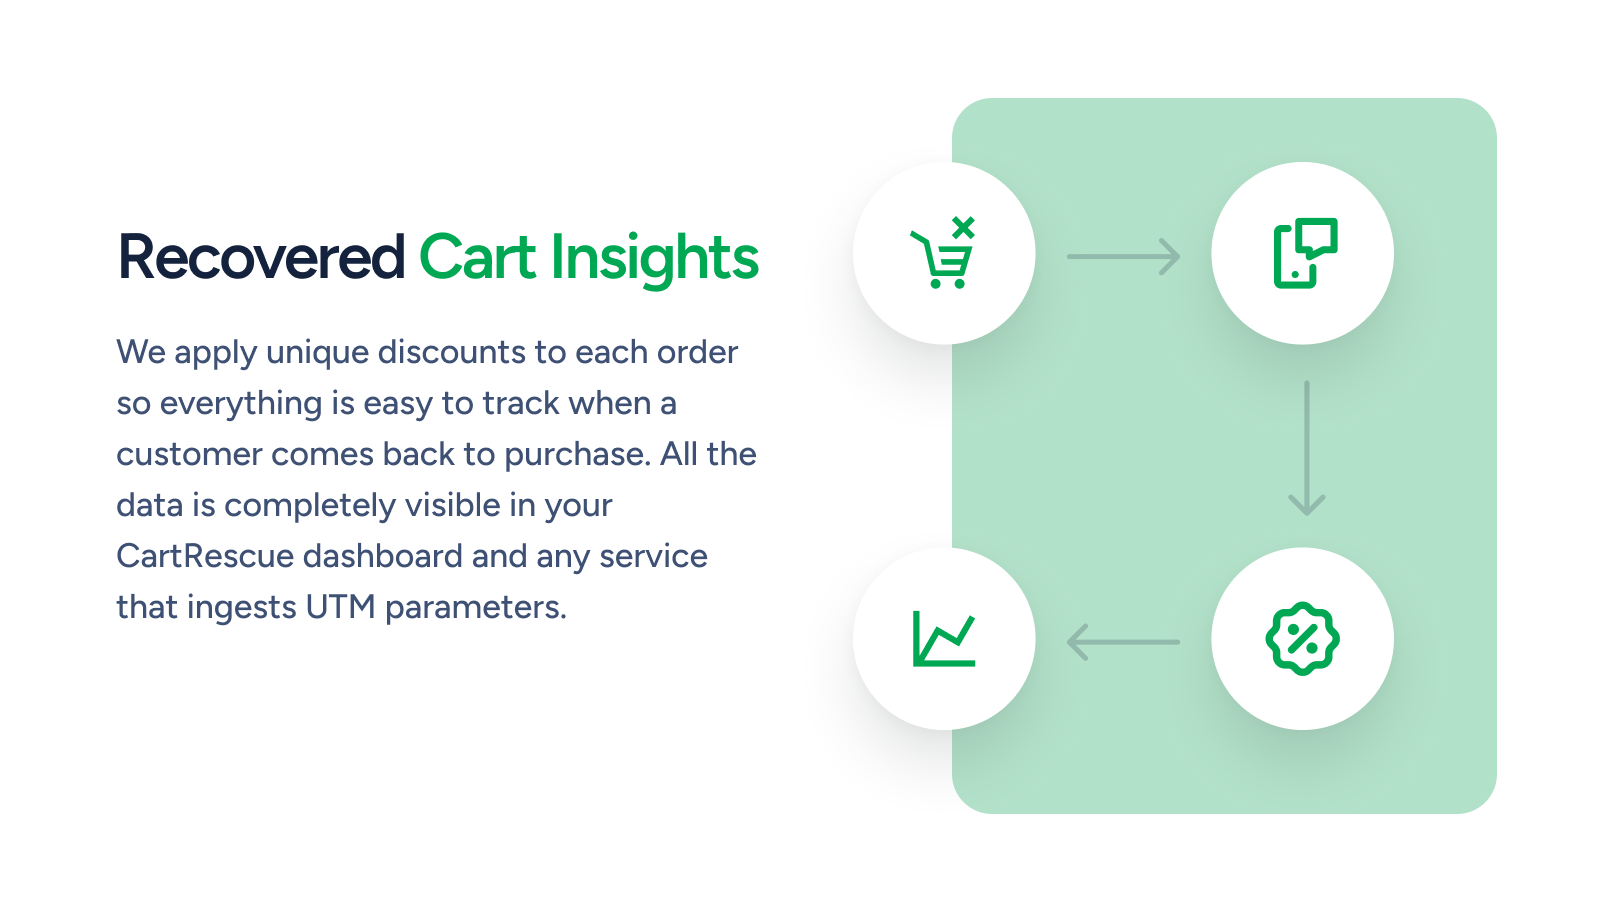 Recovered Cart Insights